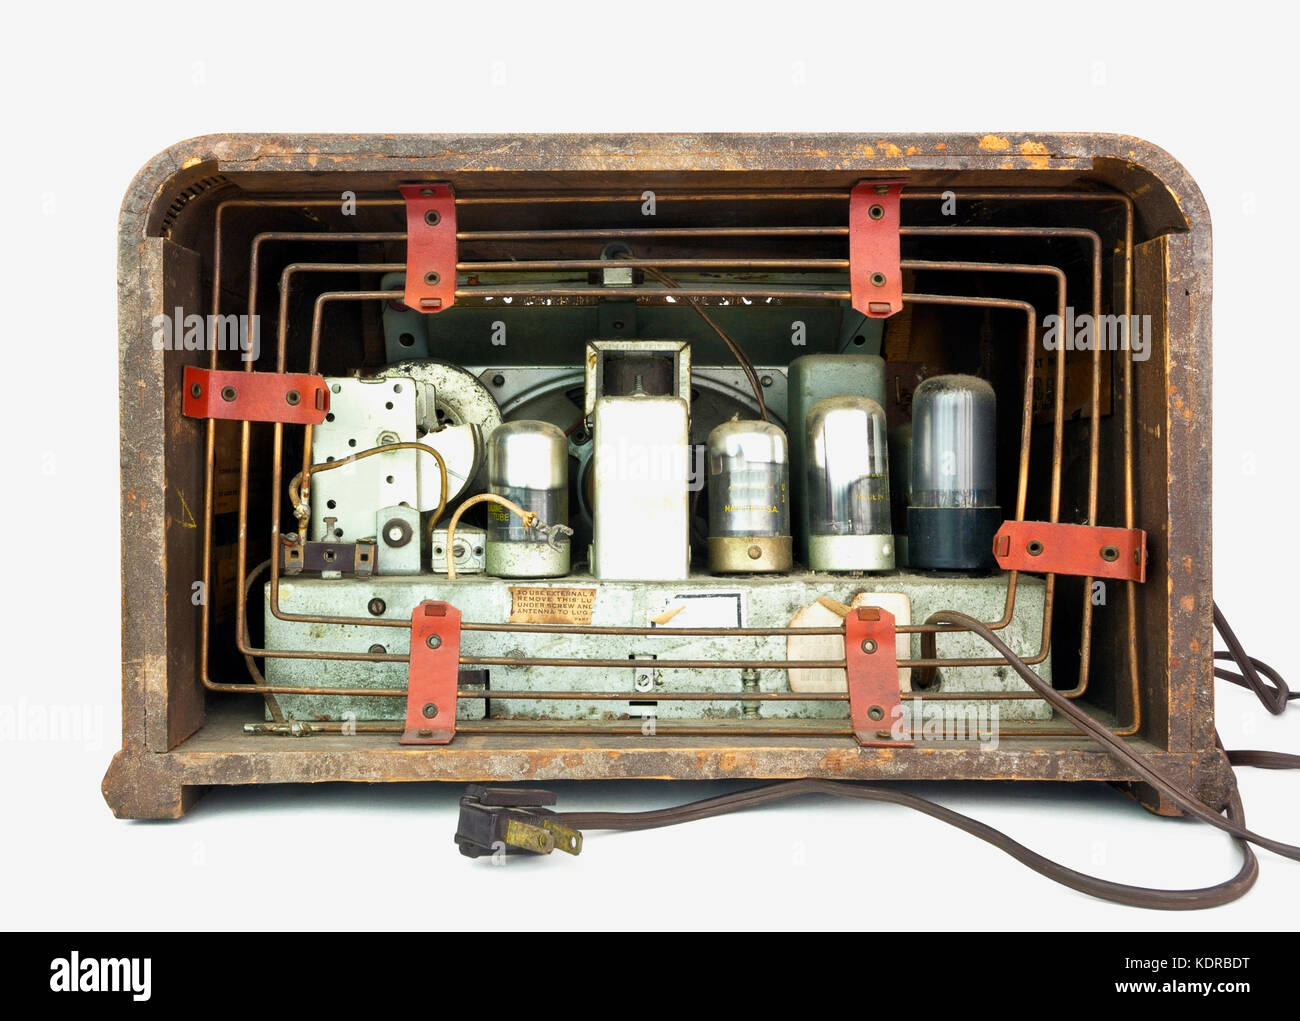 Rear view of antique vacuum tube radio in wood case. Isolated Stock Photo -  Alamy